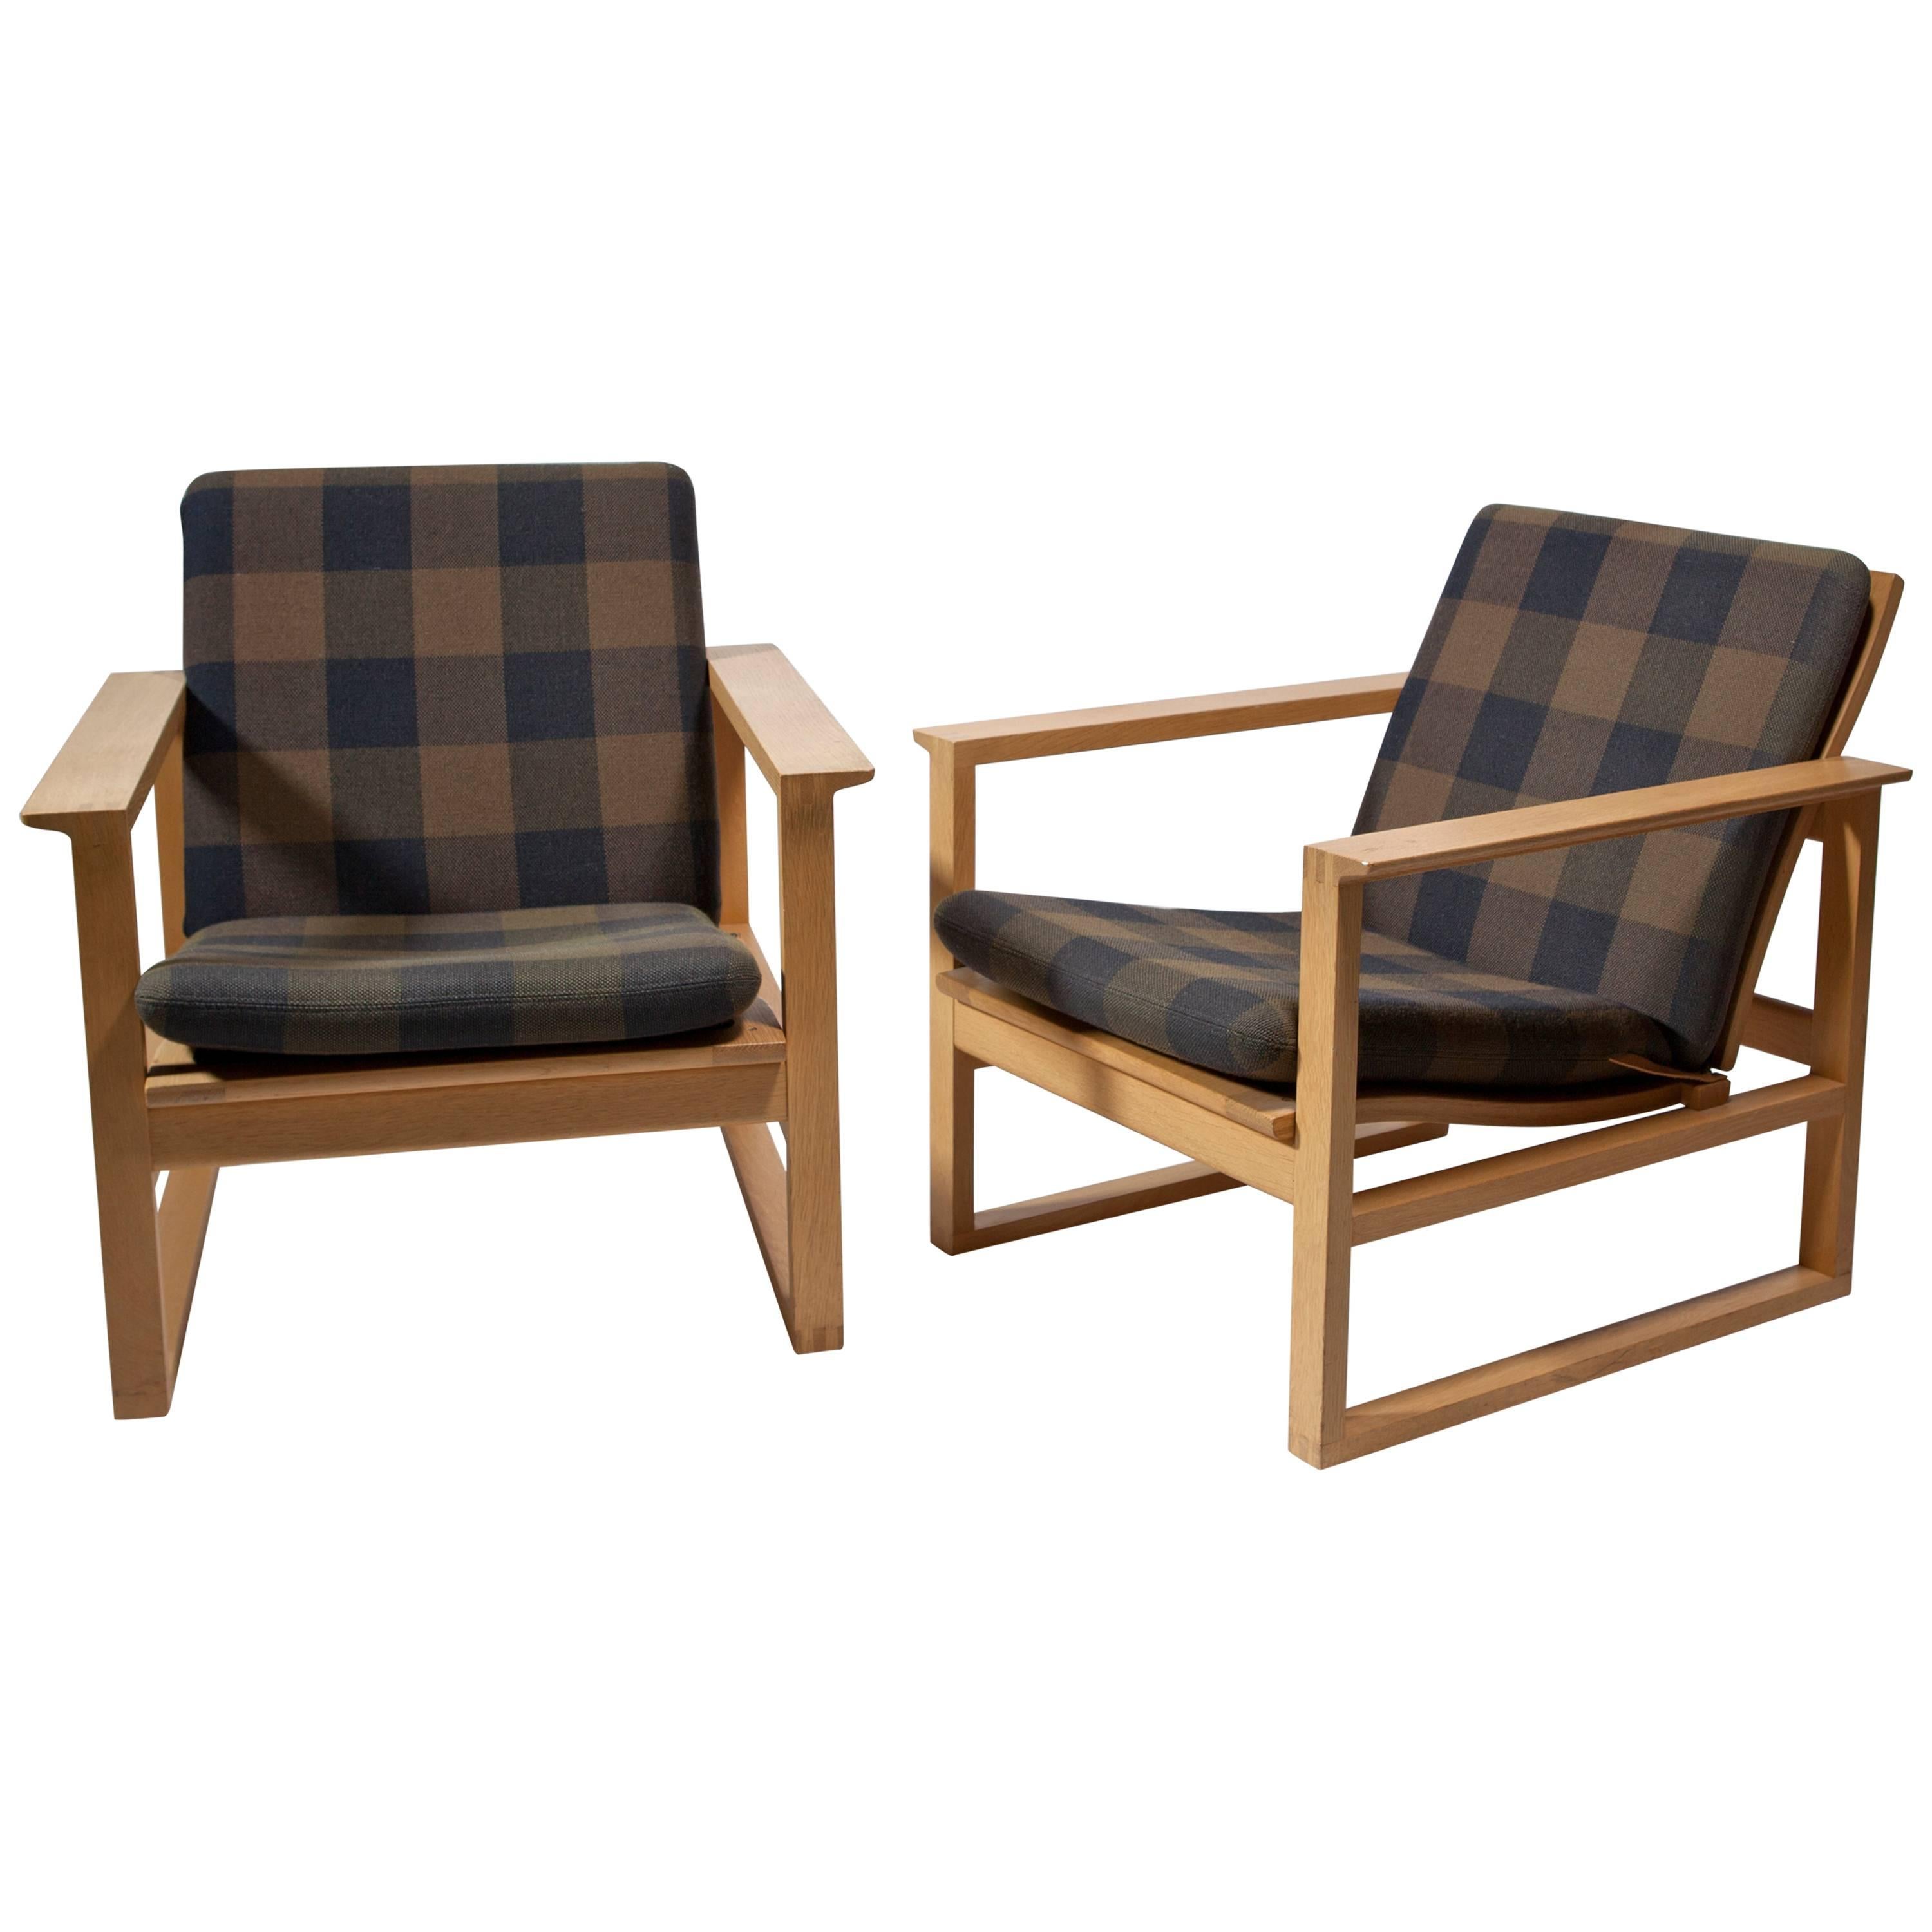 Børge Mogensen, Pair of Oak Armchairs for Fredericia Stole Fabrik, 1956